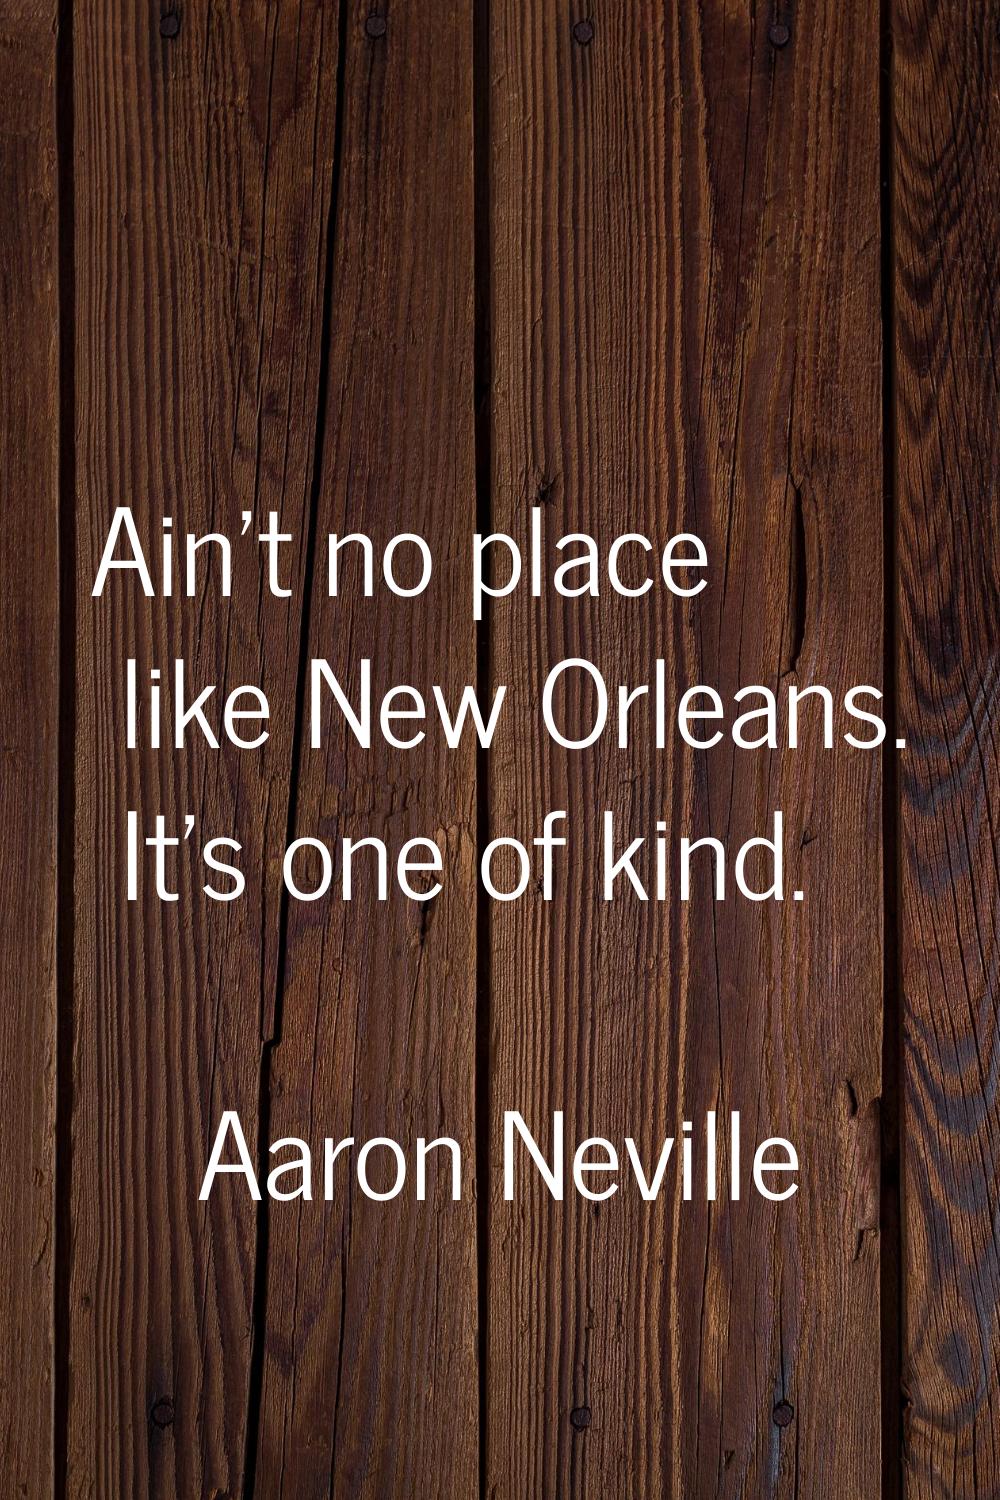 Ain't no place like New Orleans. It's one of kind.